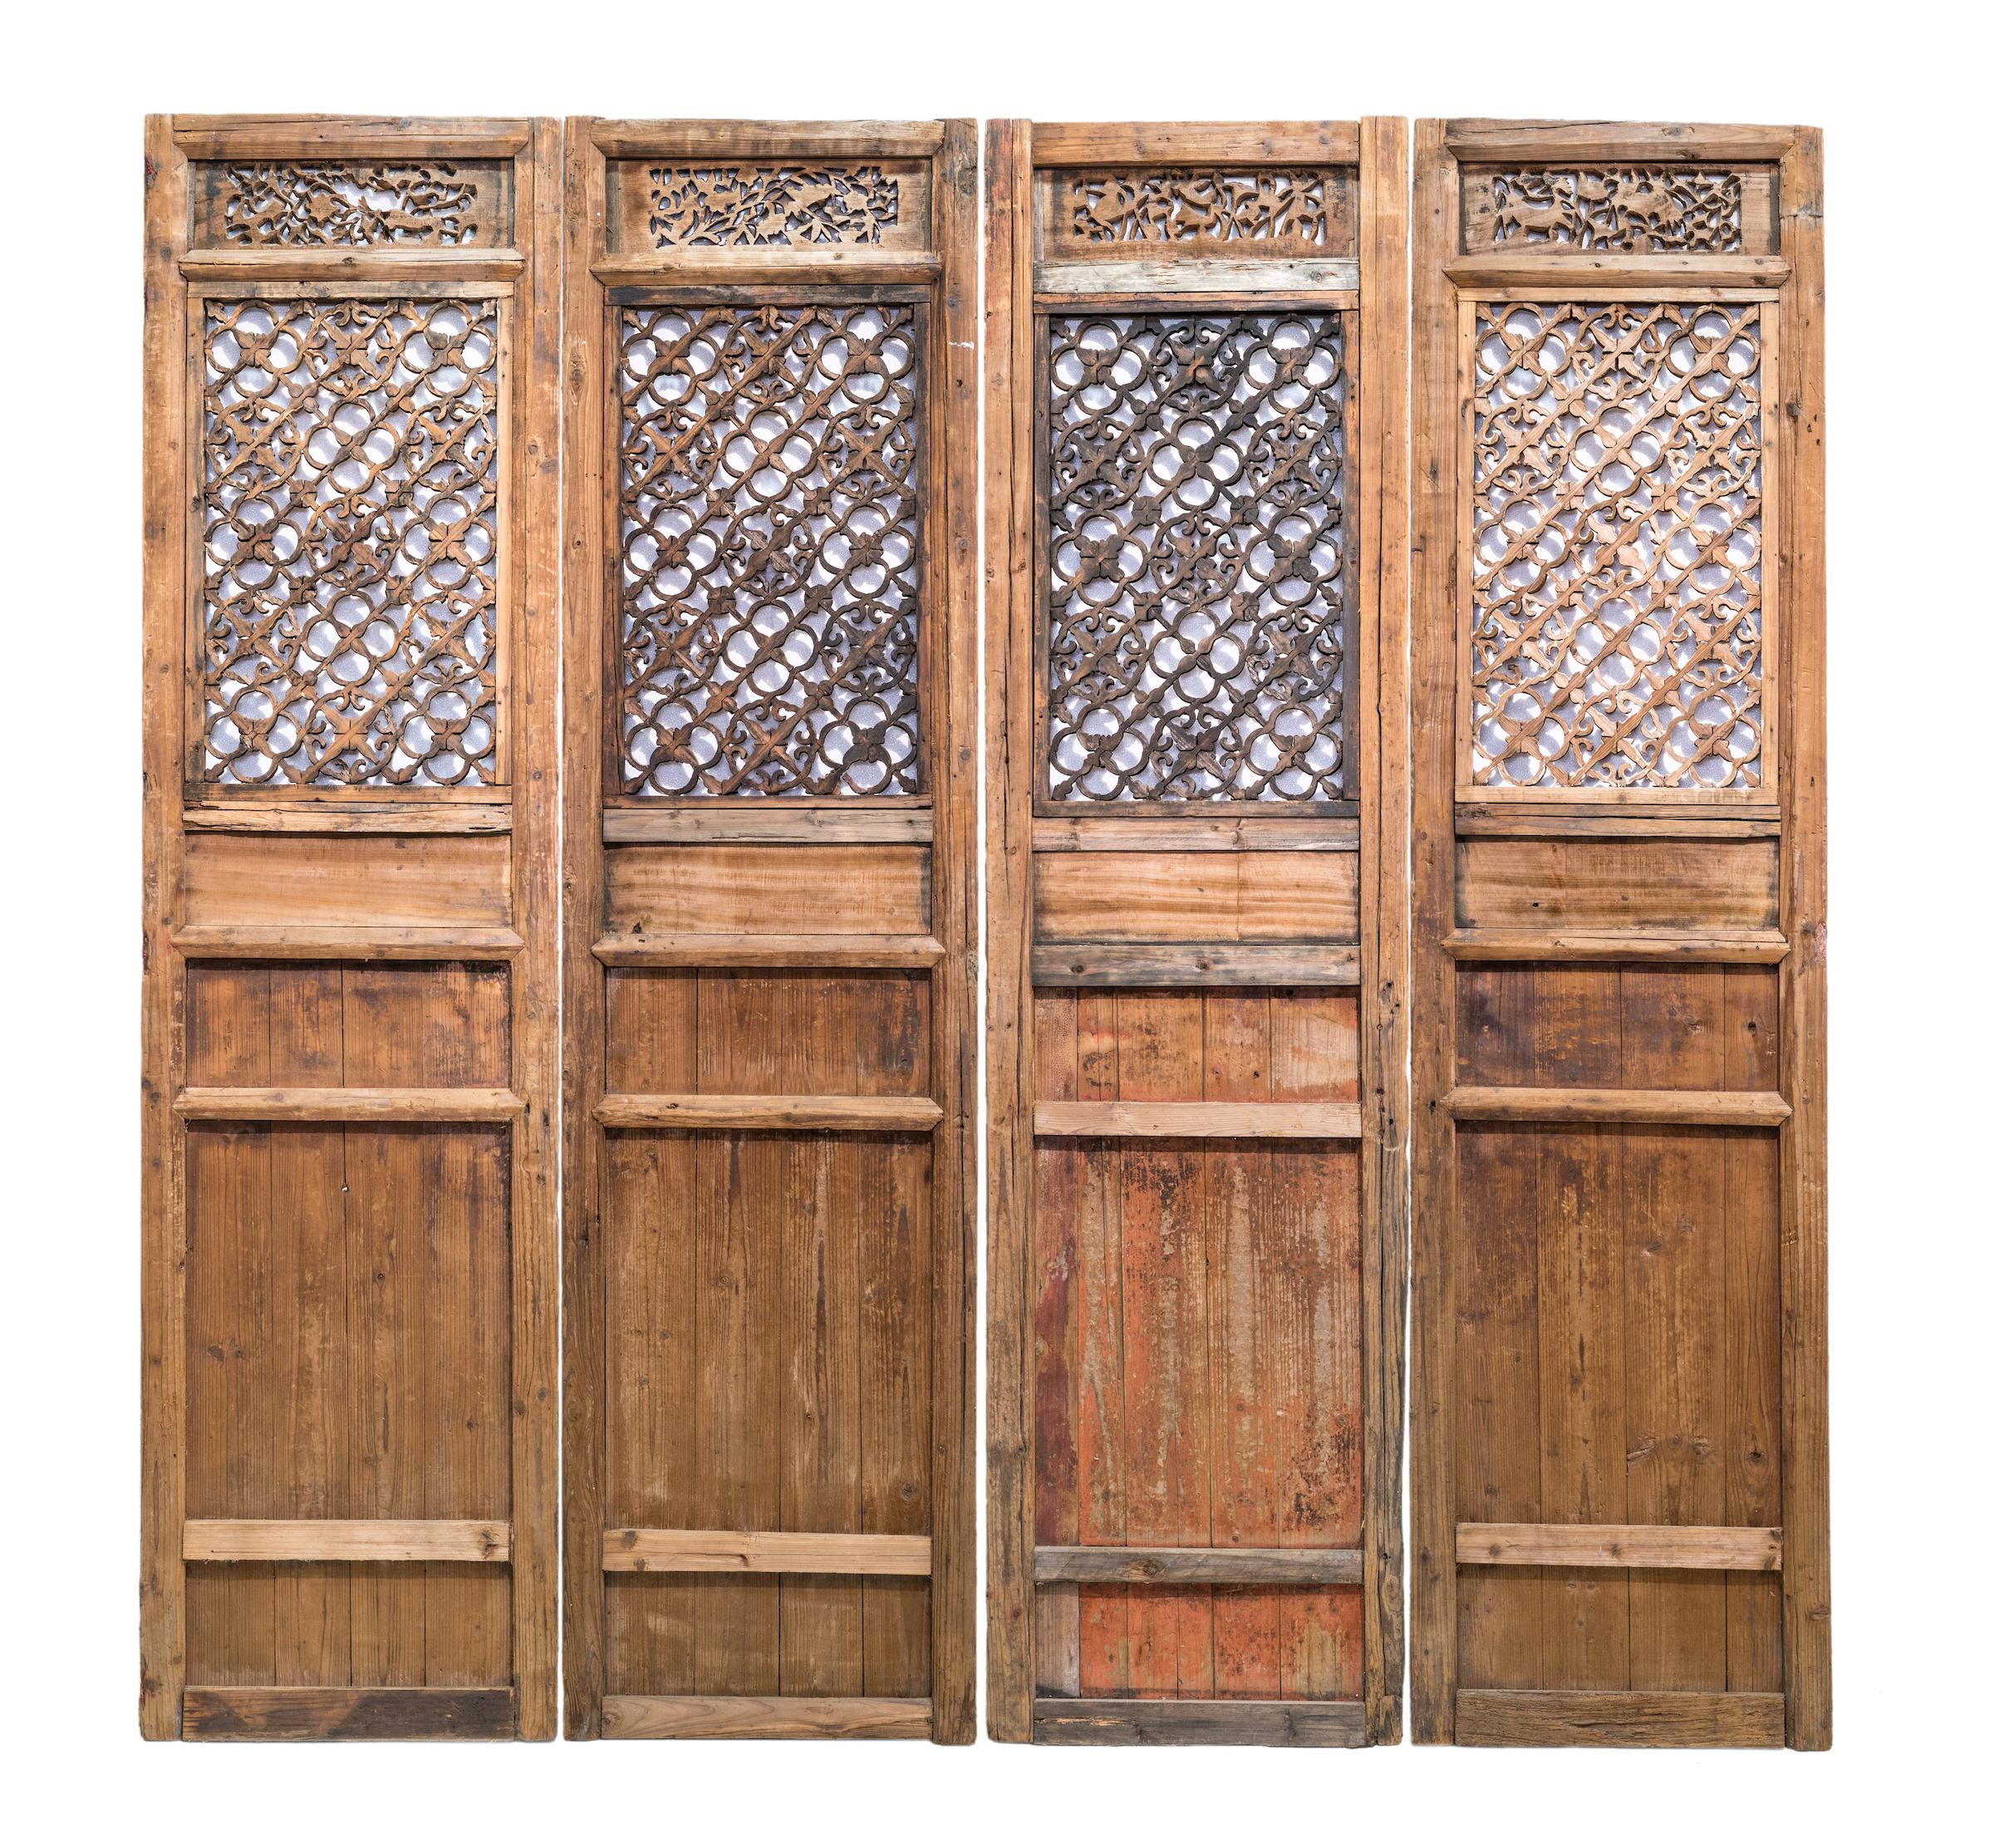 Late 19th century door panels with lattice patterns and carvings from Jiangxi province, China.
This set of doors have a very beautiful and highly unusual lattice pattern. Besides the floral elements, there are also cloud motifs embedded amongst the